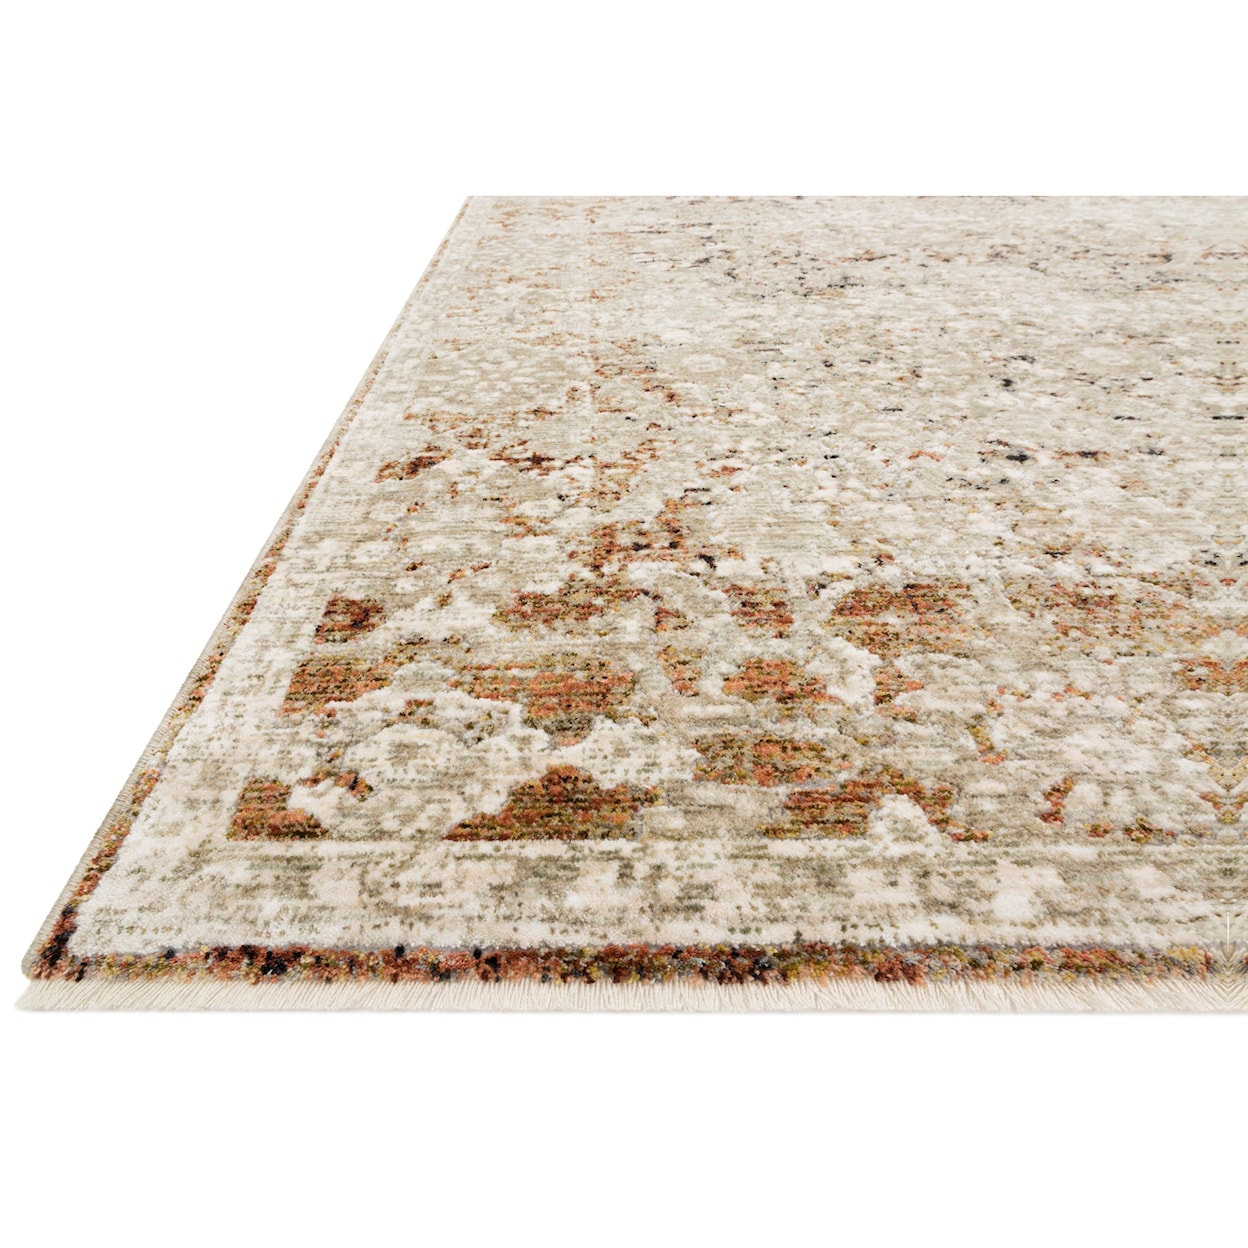 Reeds Rugs Theia 11'6" x 16' Natural / Rust Rug